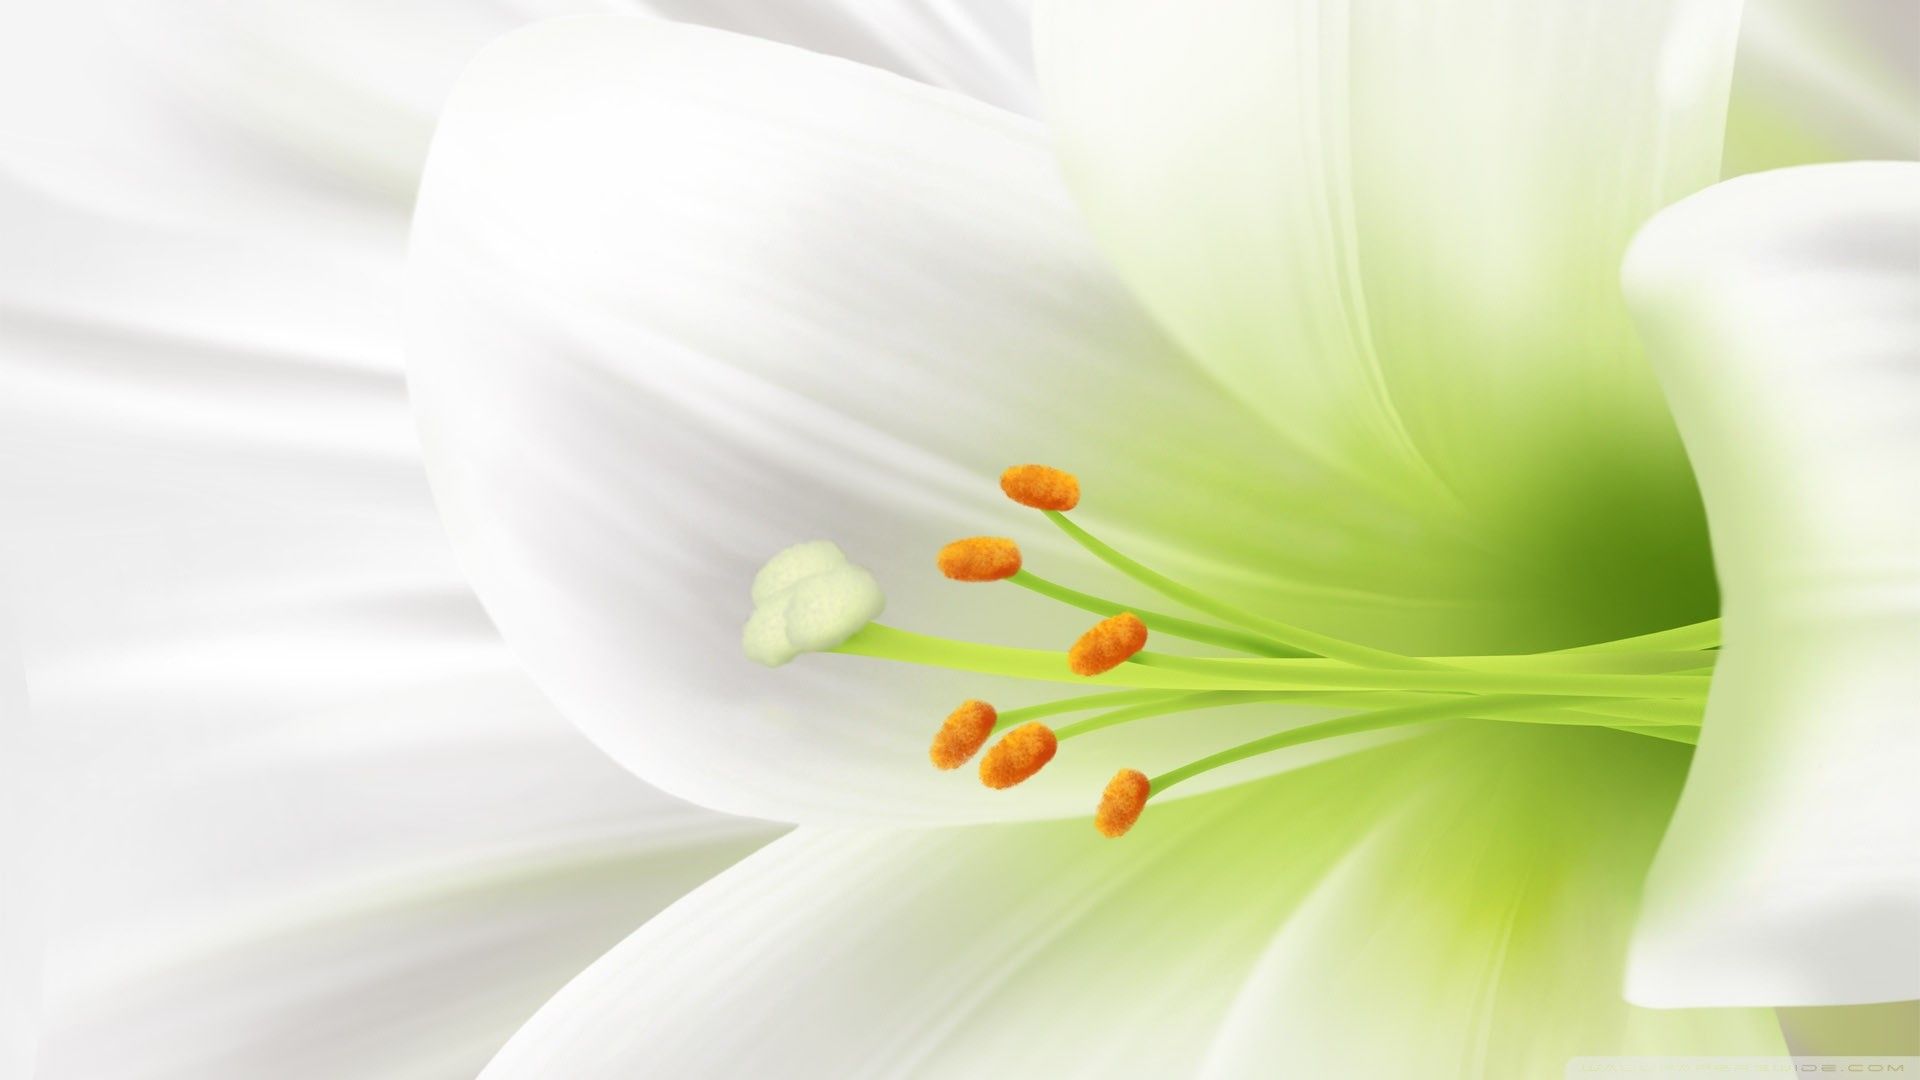 Lily Flowers Wallpapers - Wallpaper Cave